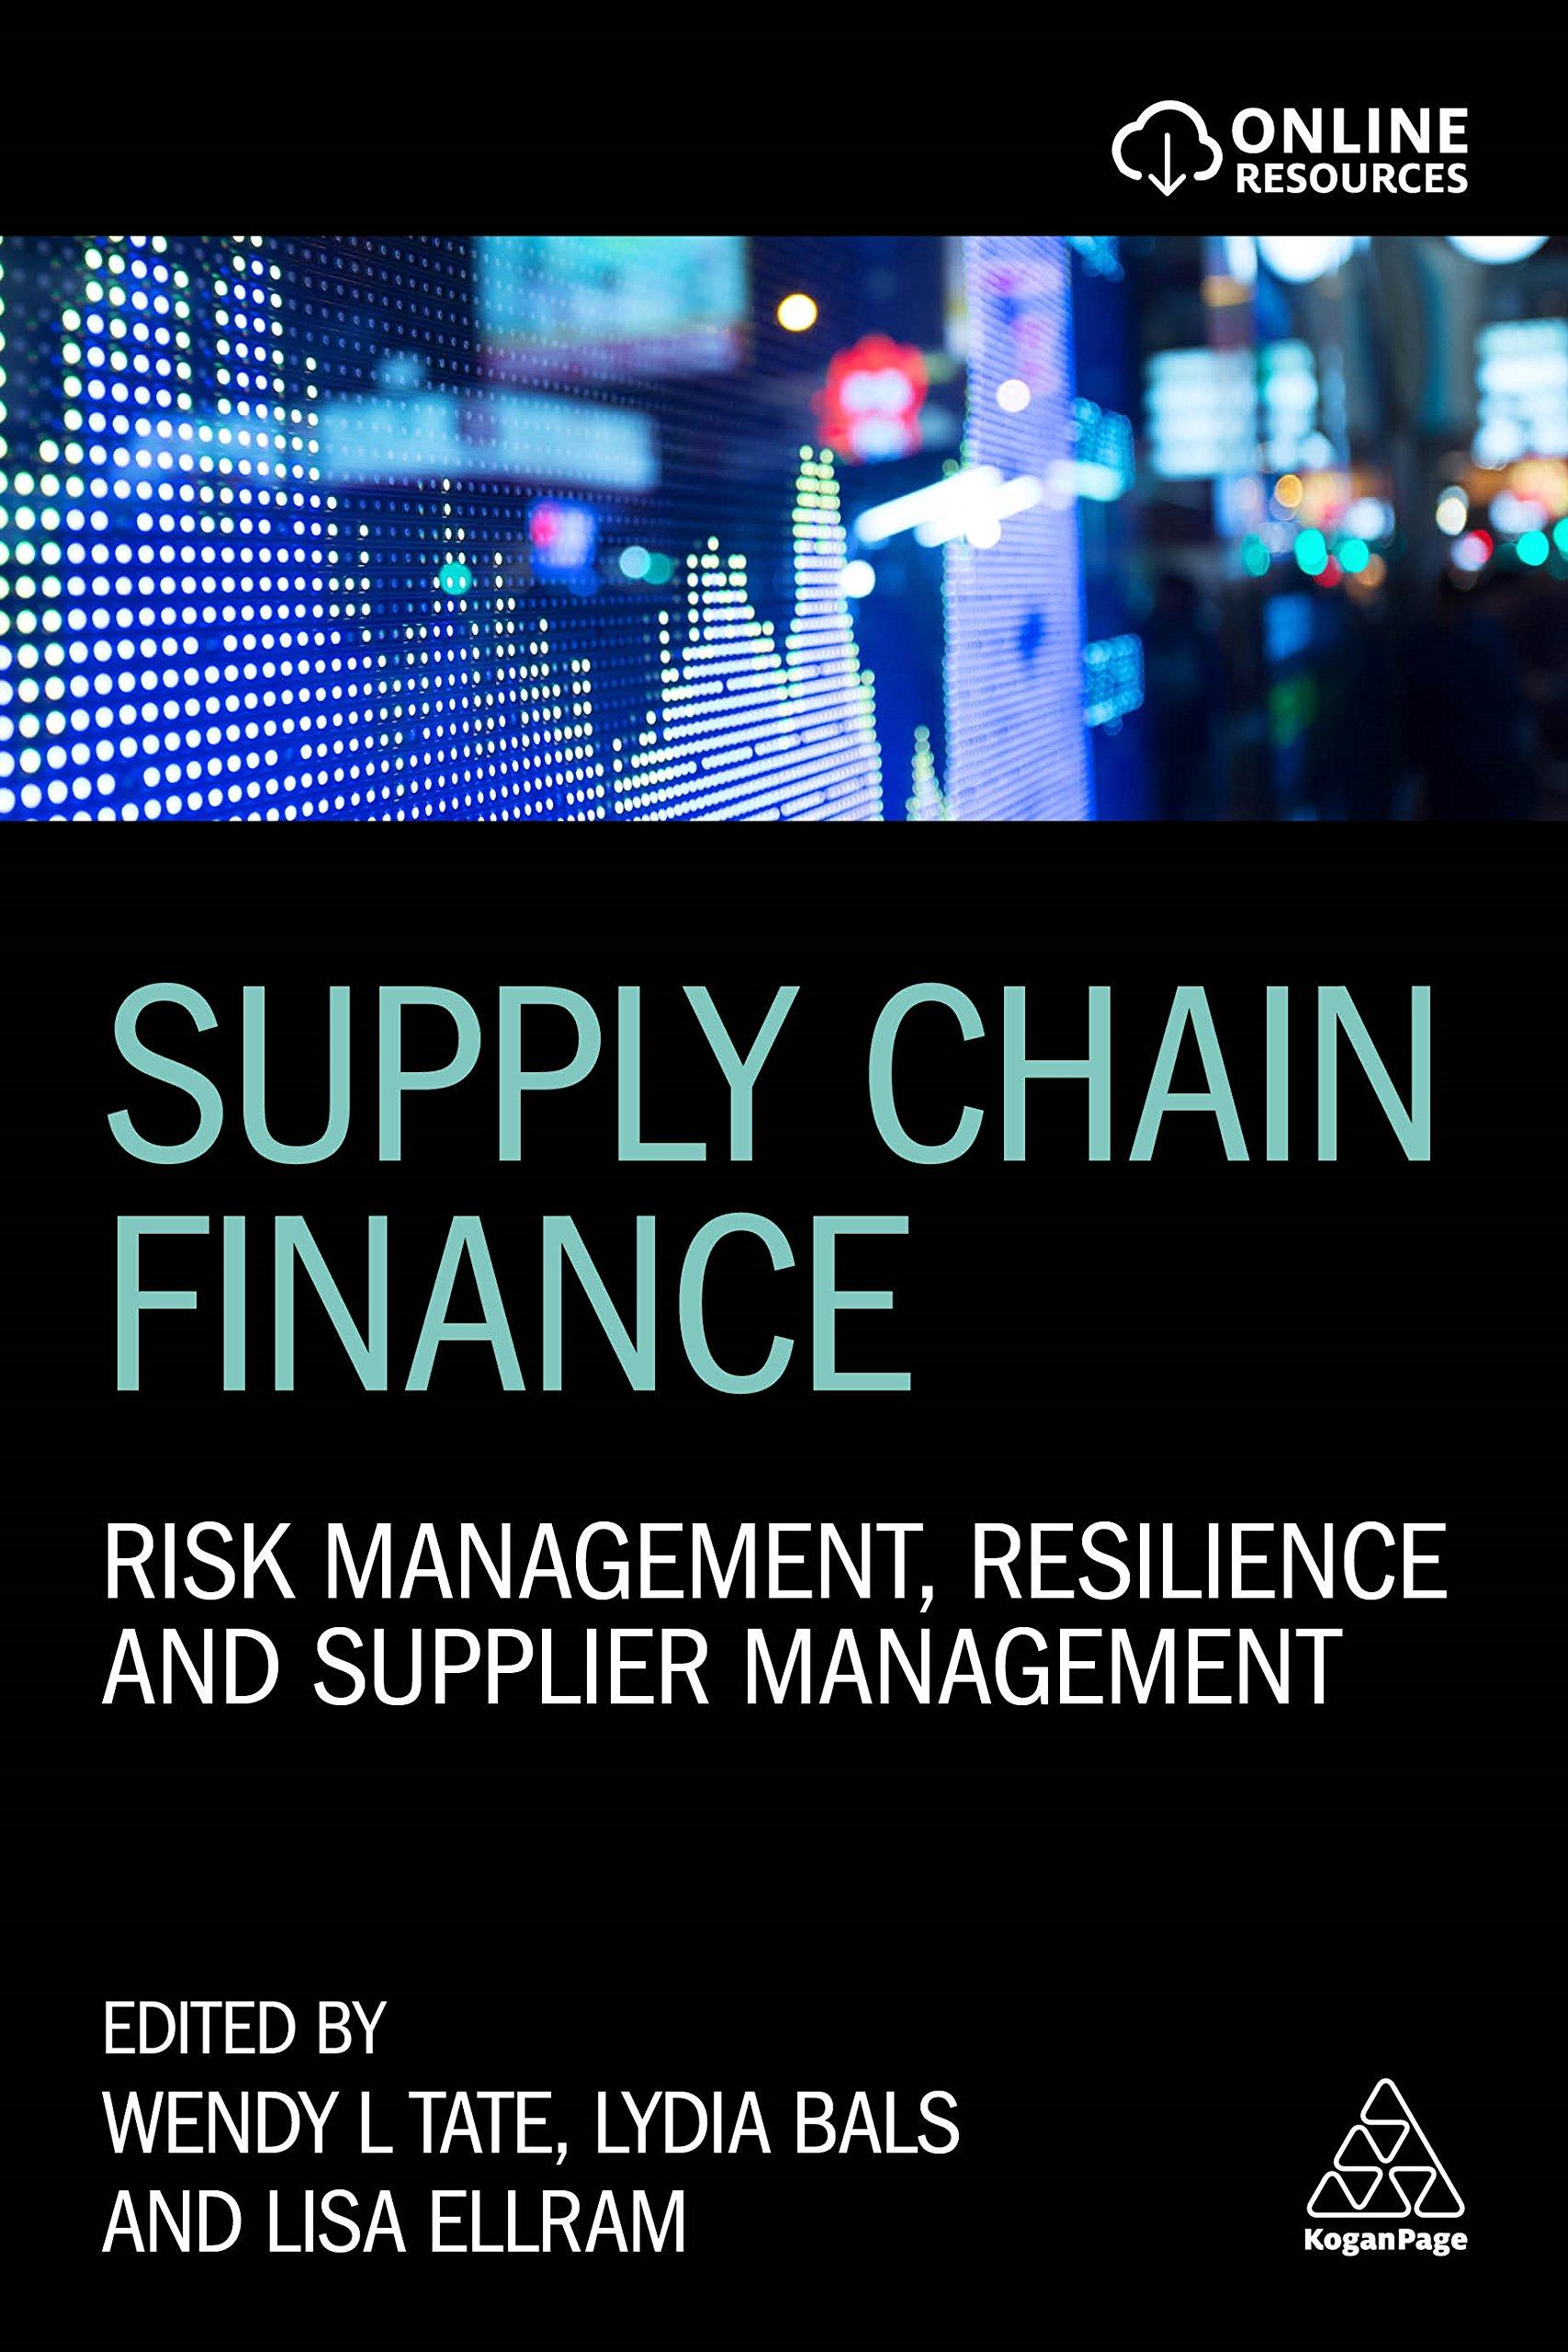 Supply Chain Finance Risk Management Resilience And Supplier Management